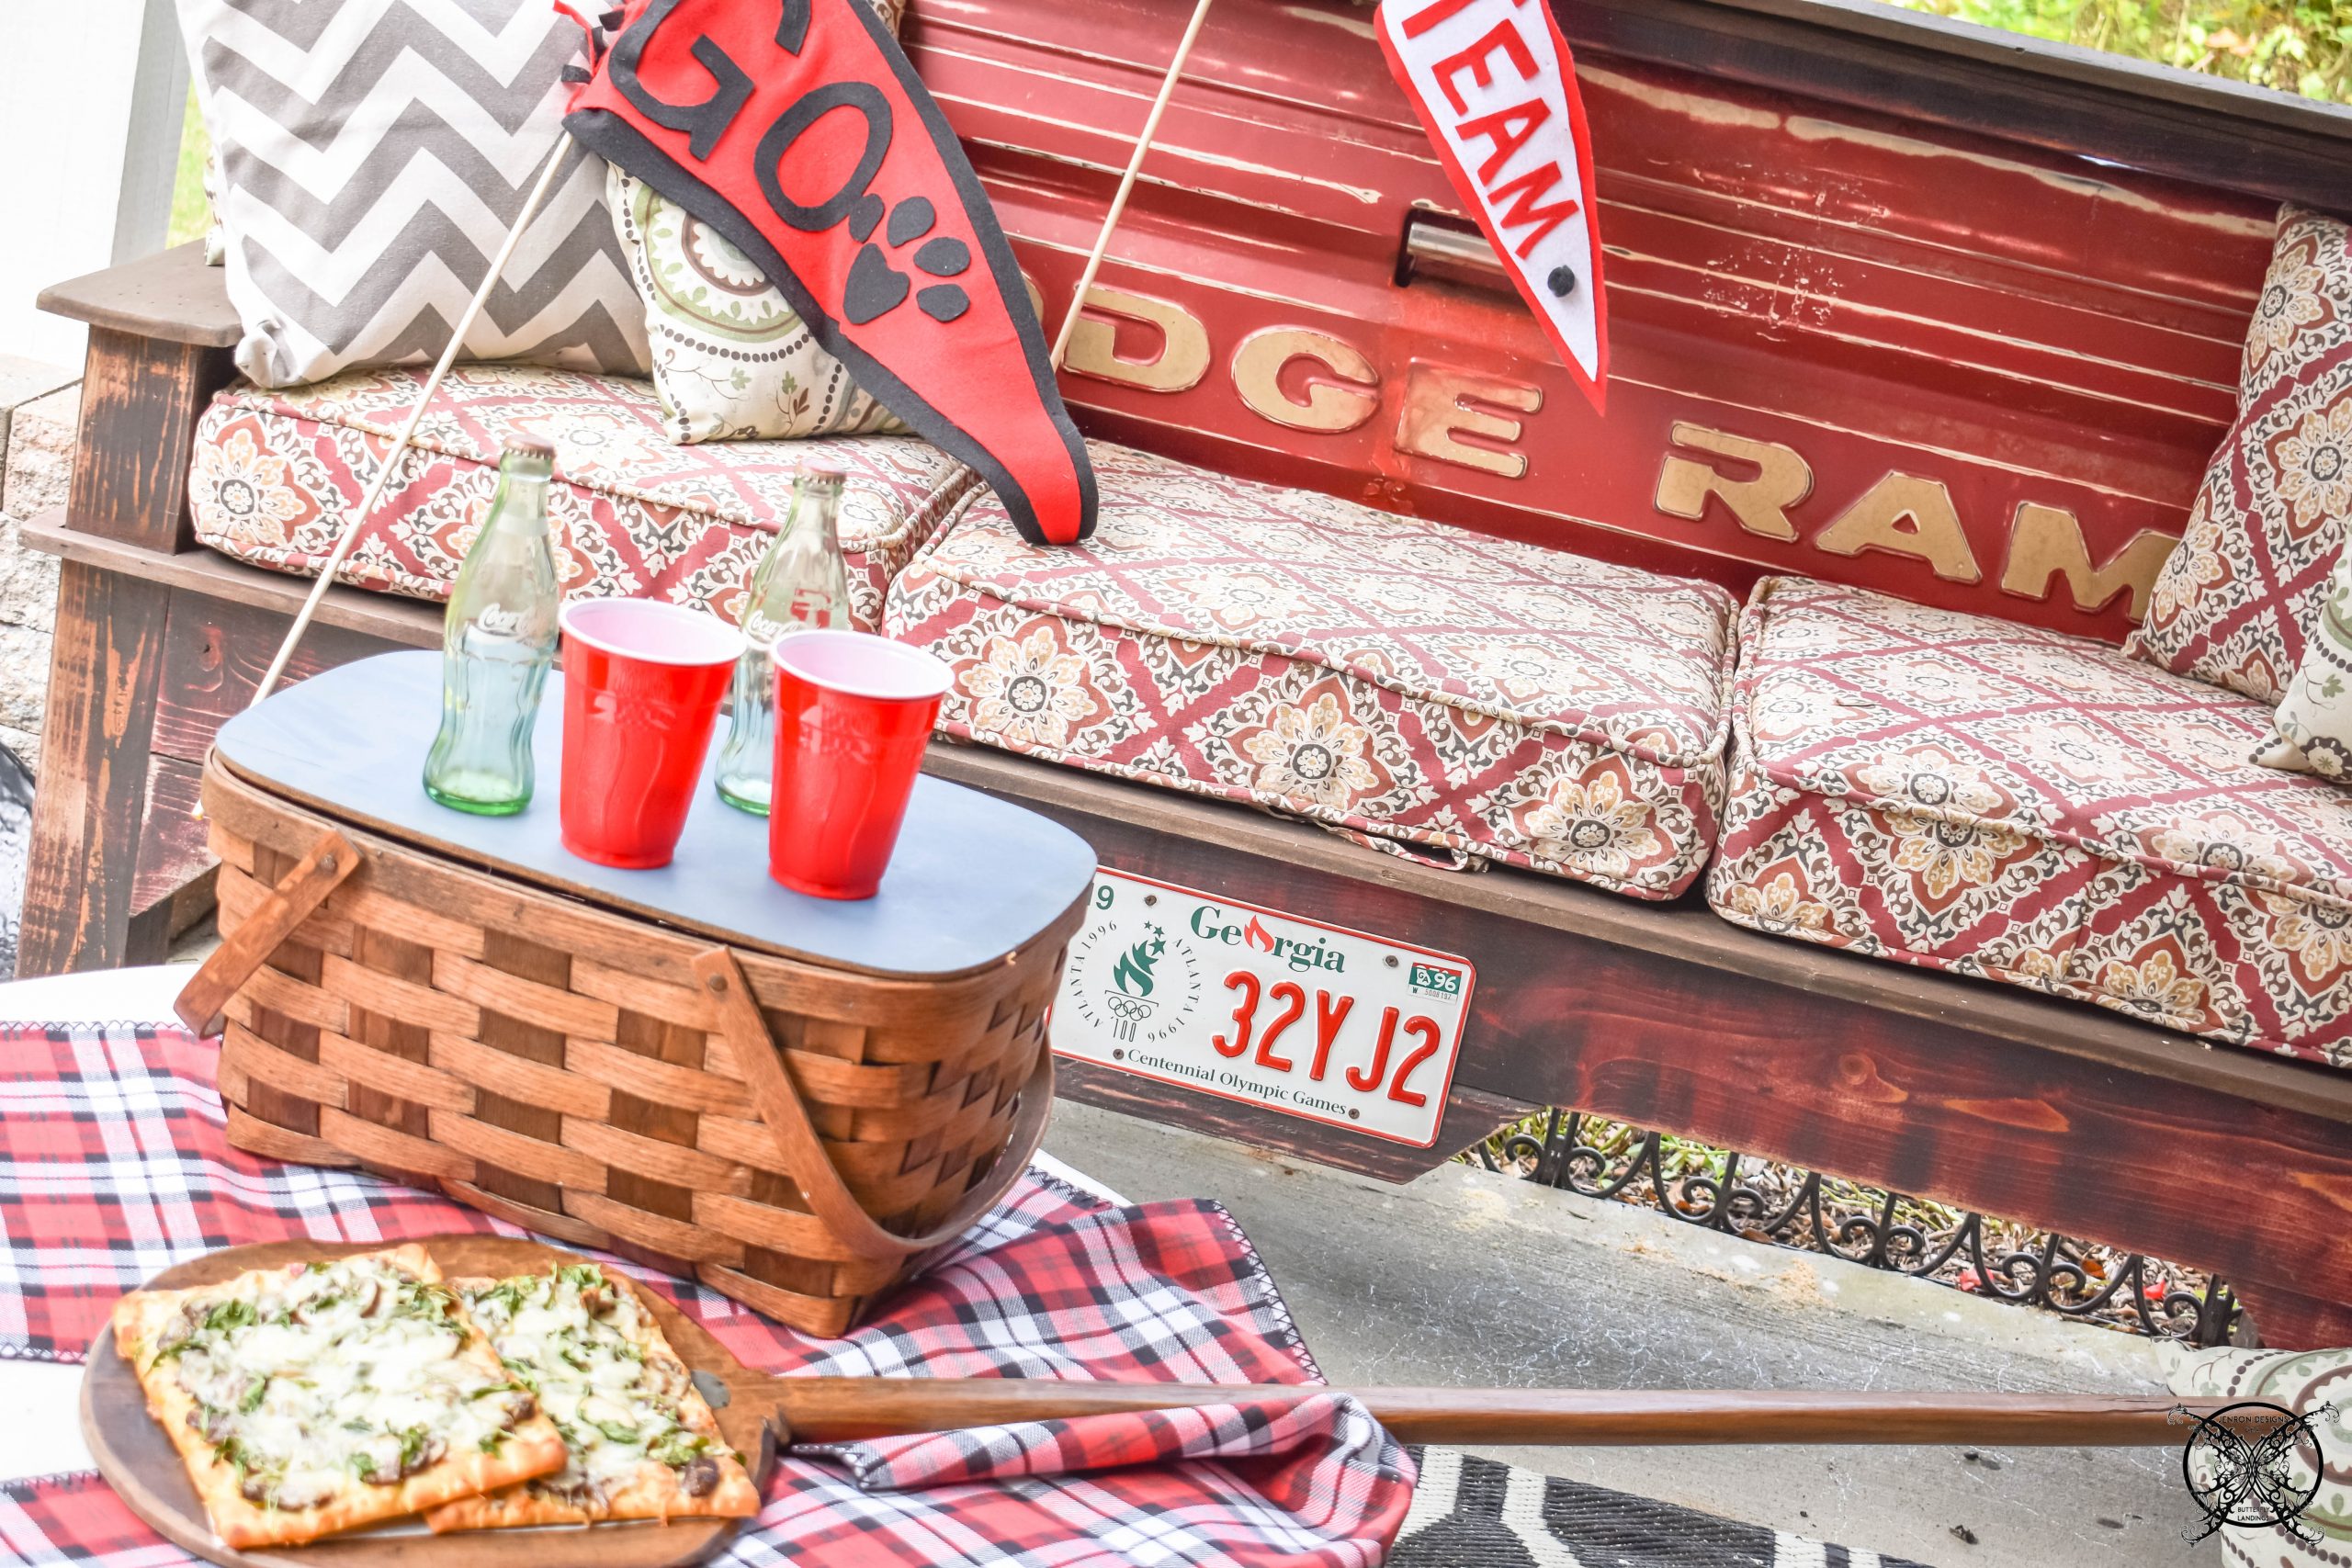 Gear up for the Game of Tailgating: A Wide Range of Essential Supplies and Stylish Merchandise Await!